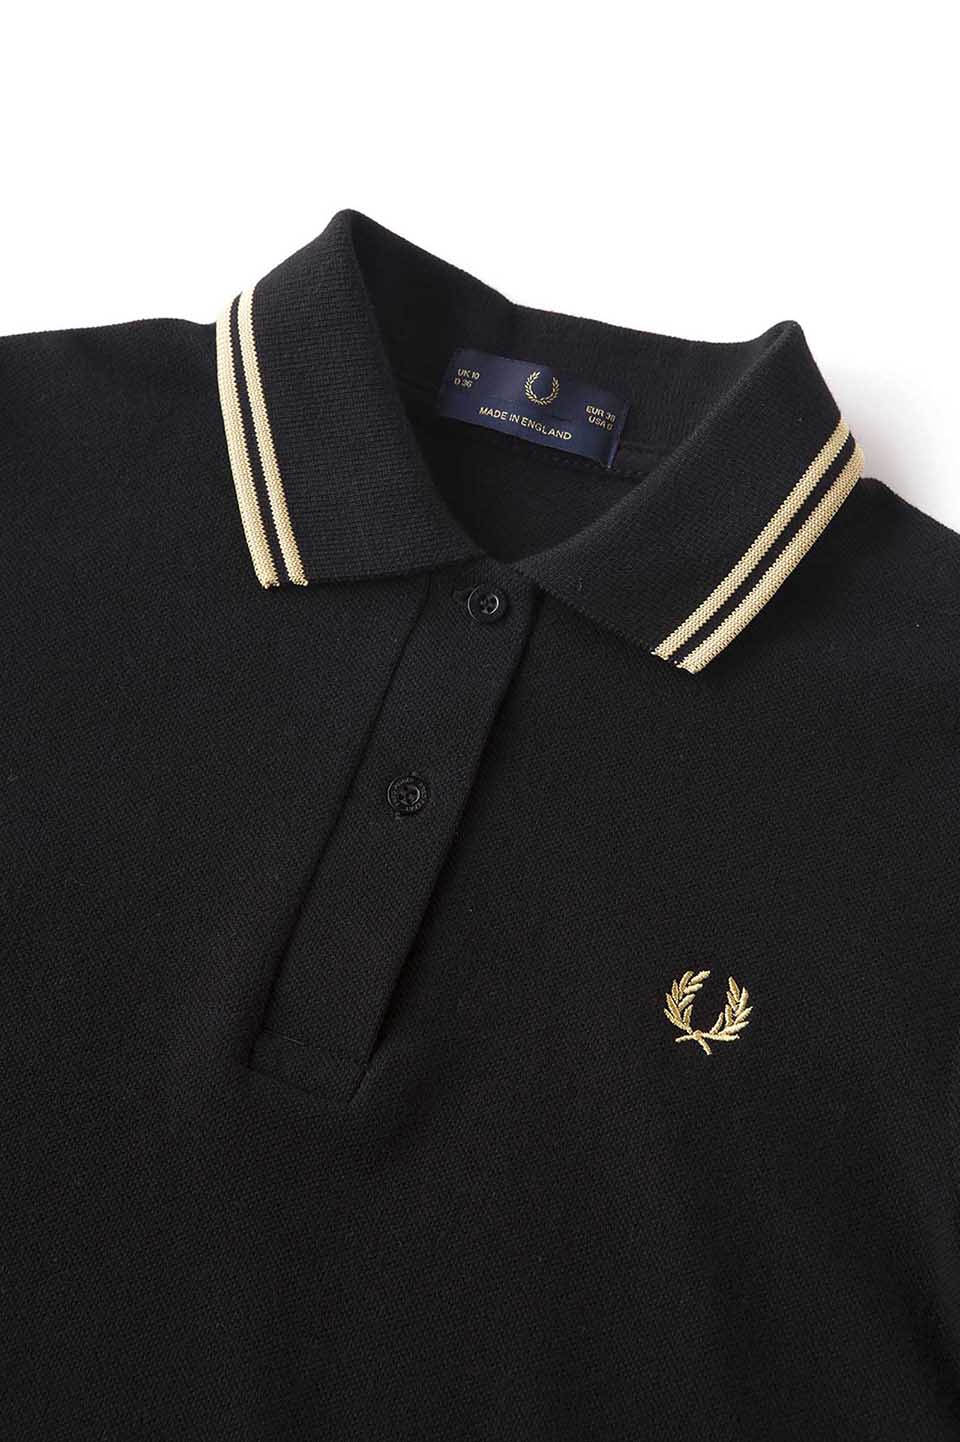 The Fred Perry Shirt - G12(8 157：BLACK / CHAMPAGNE): | FRED PERRY JAPAN |  フレッドペリー日本公式サイト